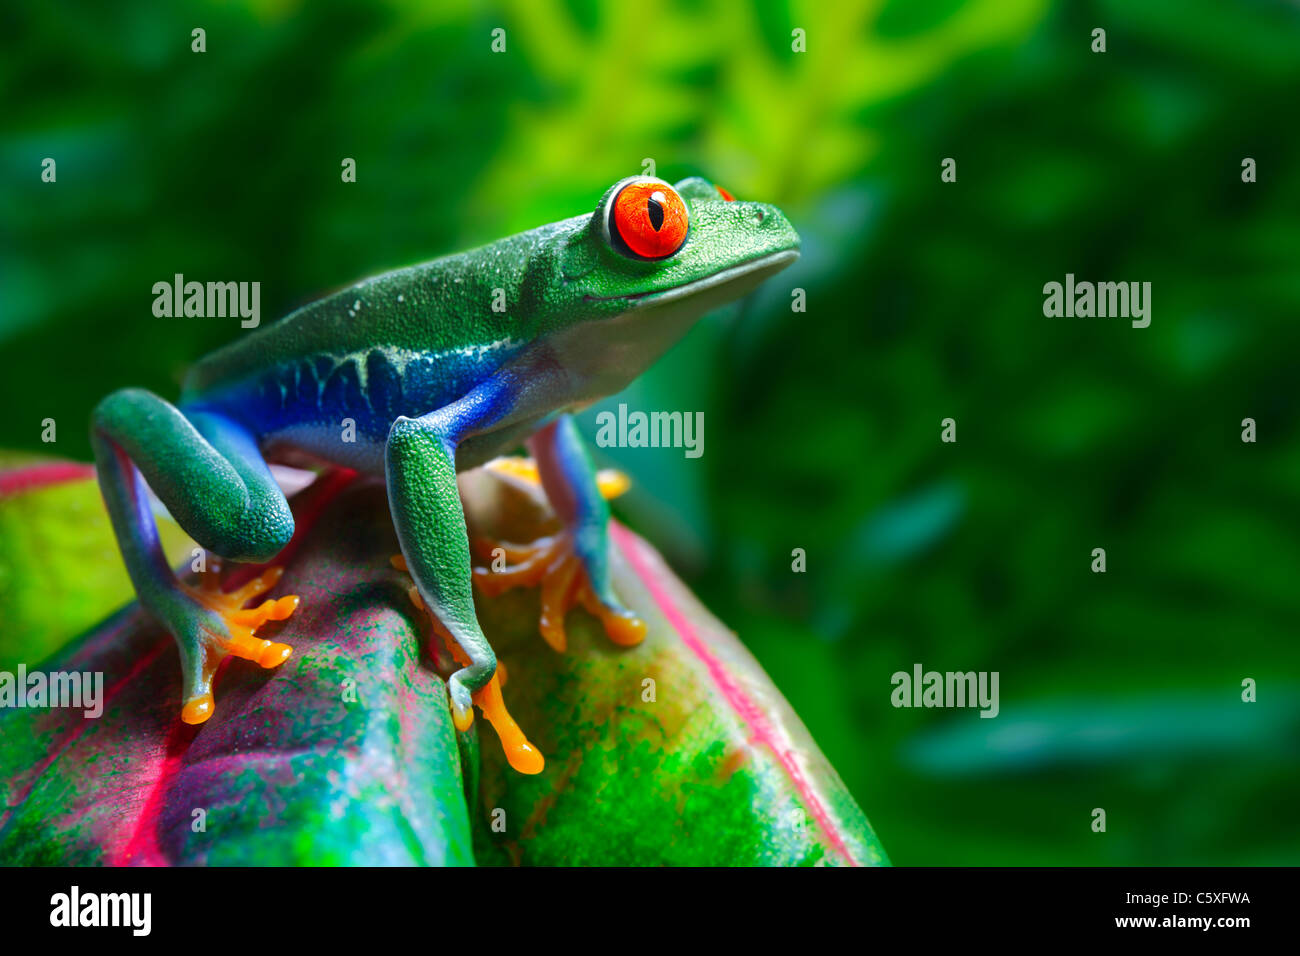 Colorido Red-Eyed Tree Frog Foto de stock